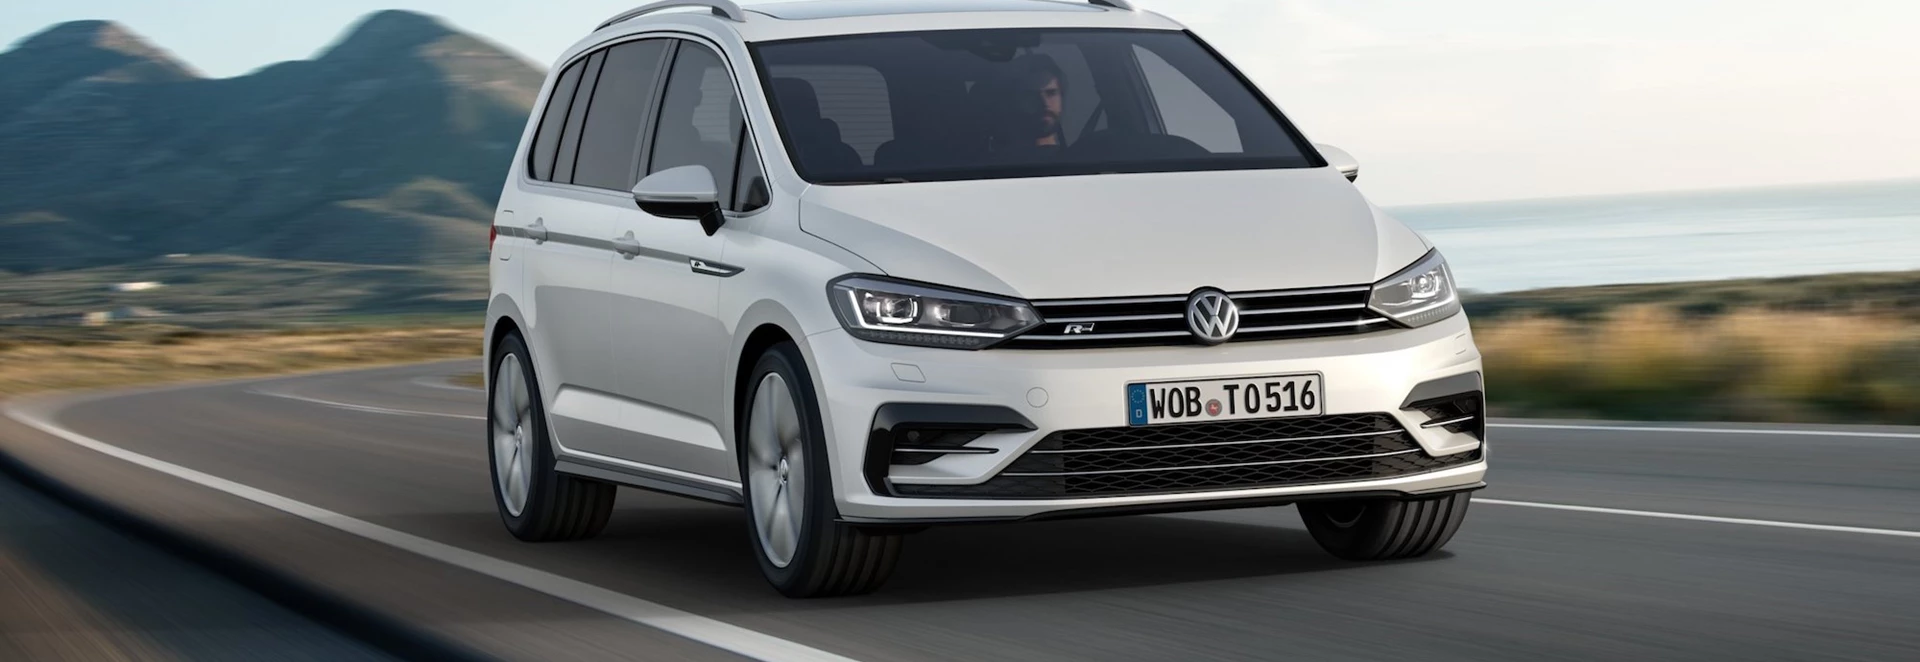 Guide to Volkswagen's Family car range: What to buy